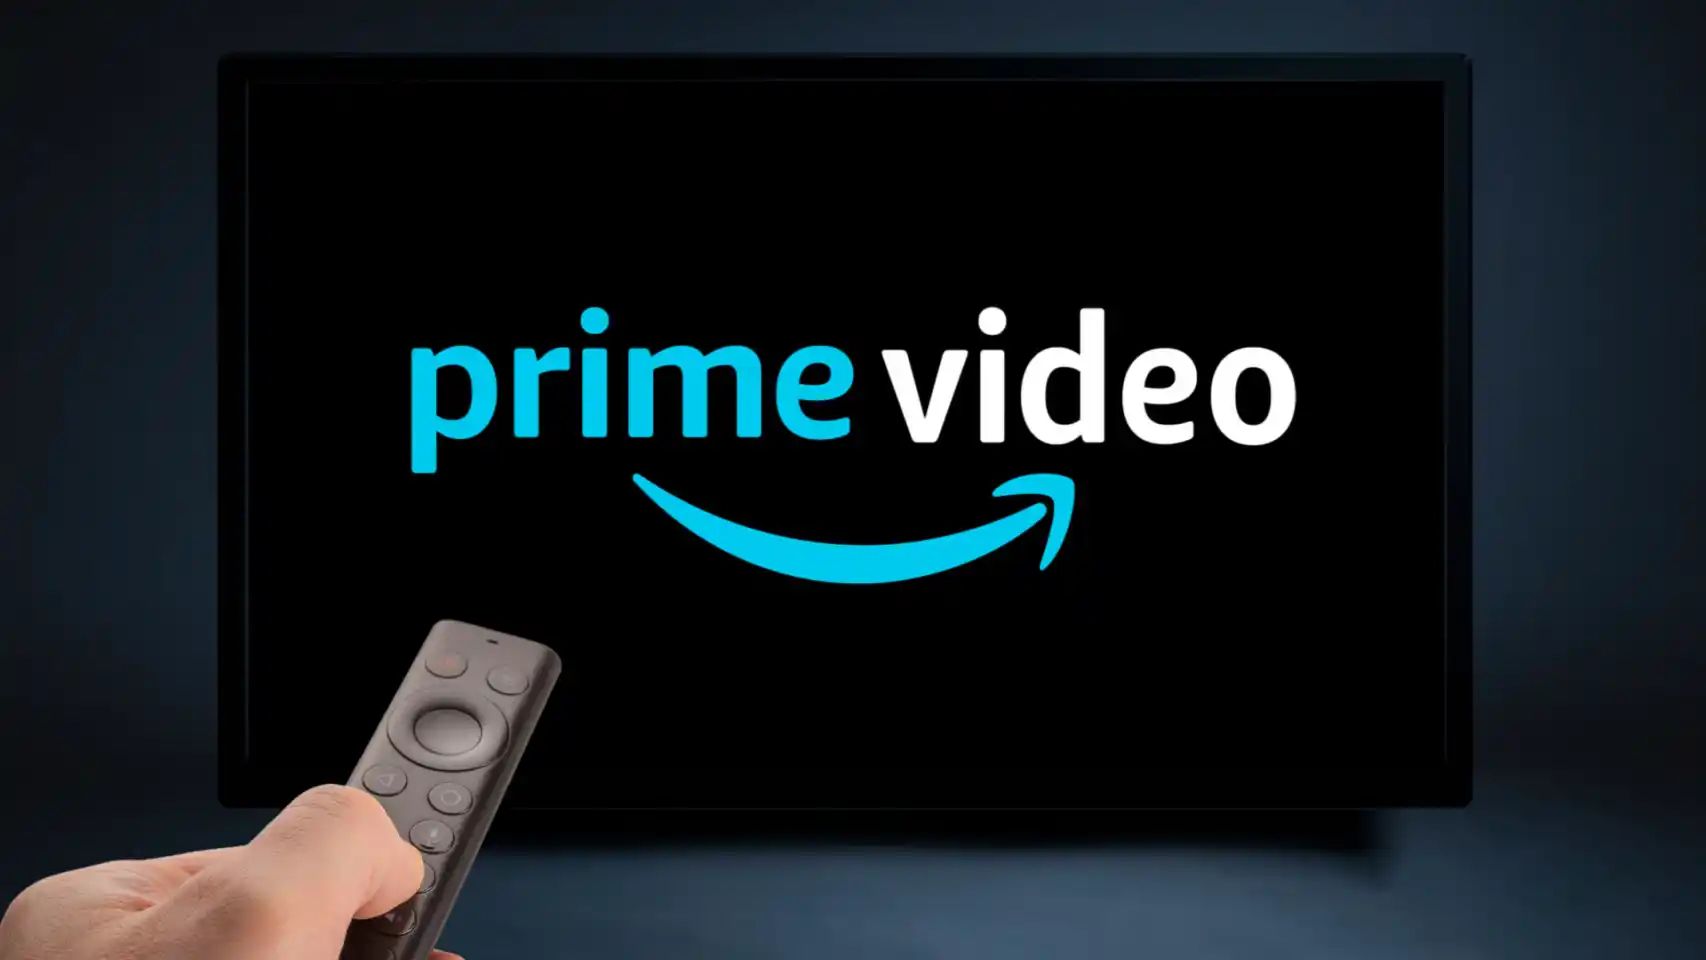 Why Am I Being Charged For Prime Video If I Have Amazon Prime